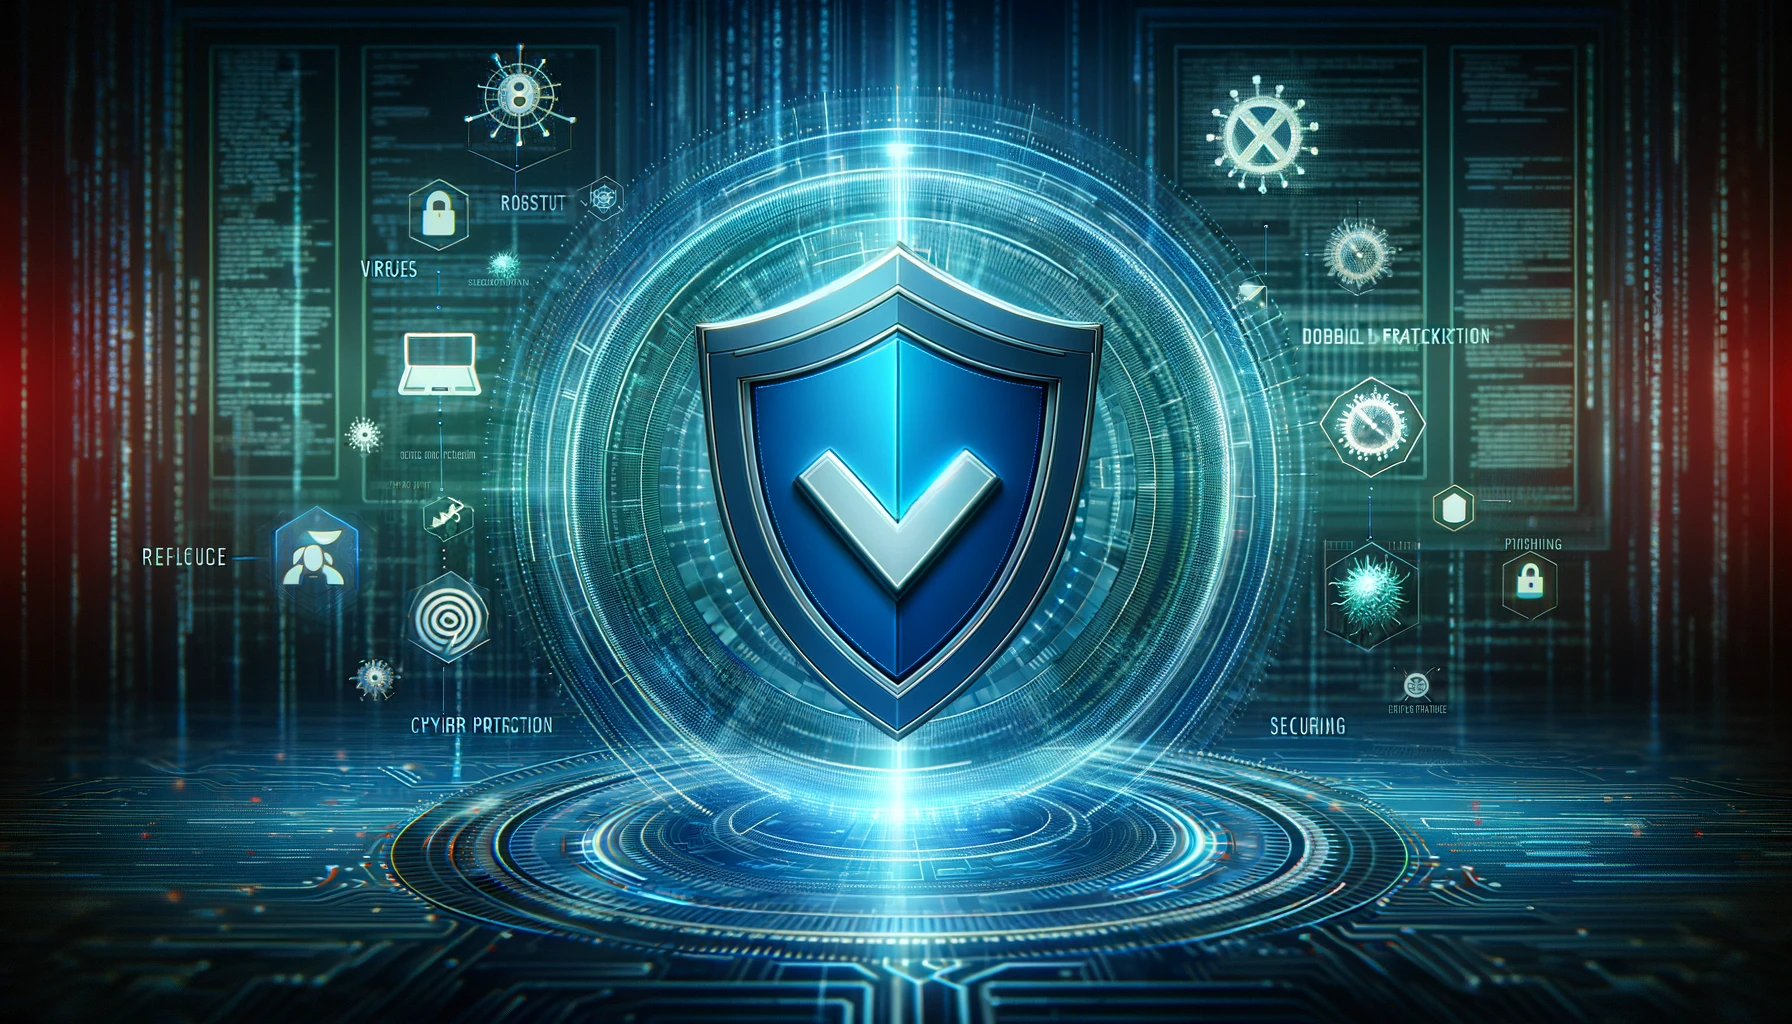 The image showcases a digital shield icon in the center, representing antivirus protection, set against a backdrop of digital code and cyber threats, conveying a message of security and reliability in safeguarding digital information.